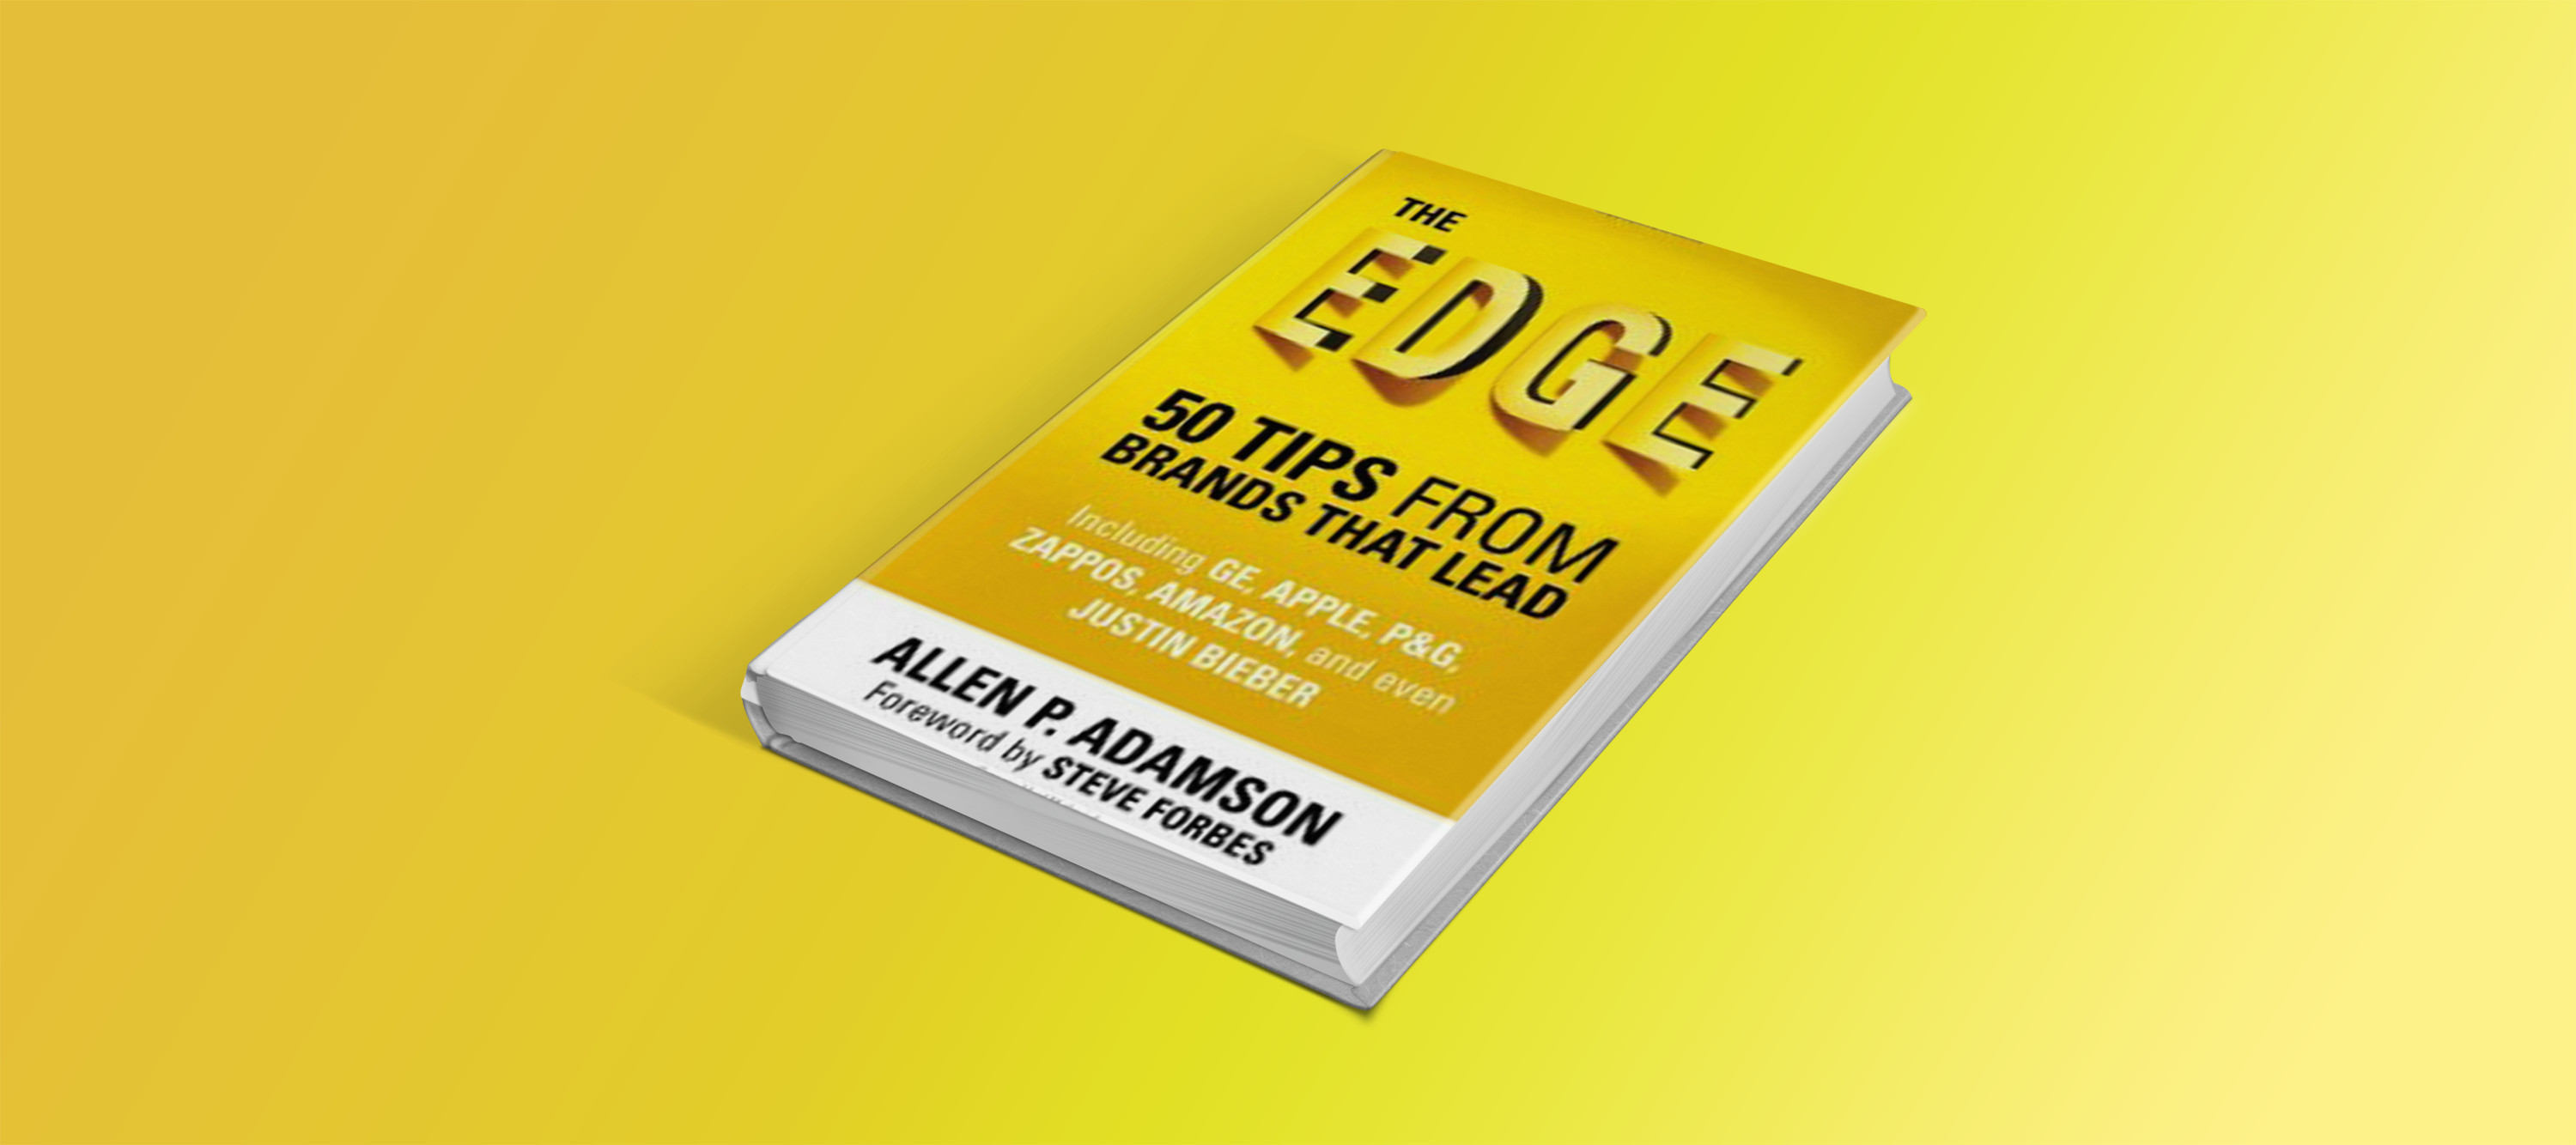 The Edge book cover background